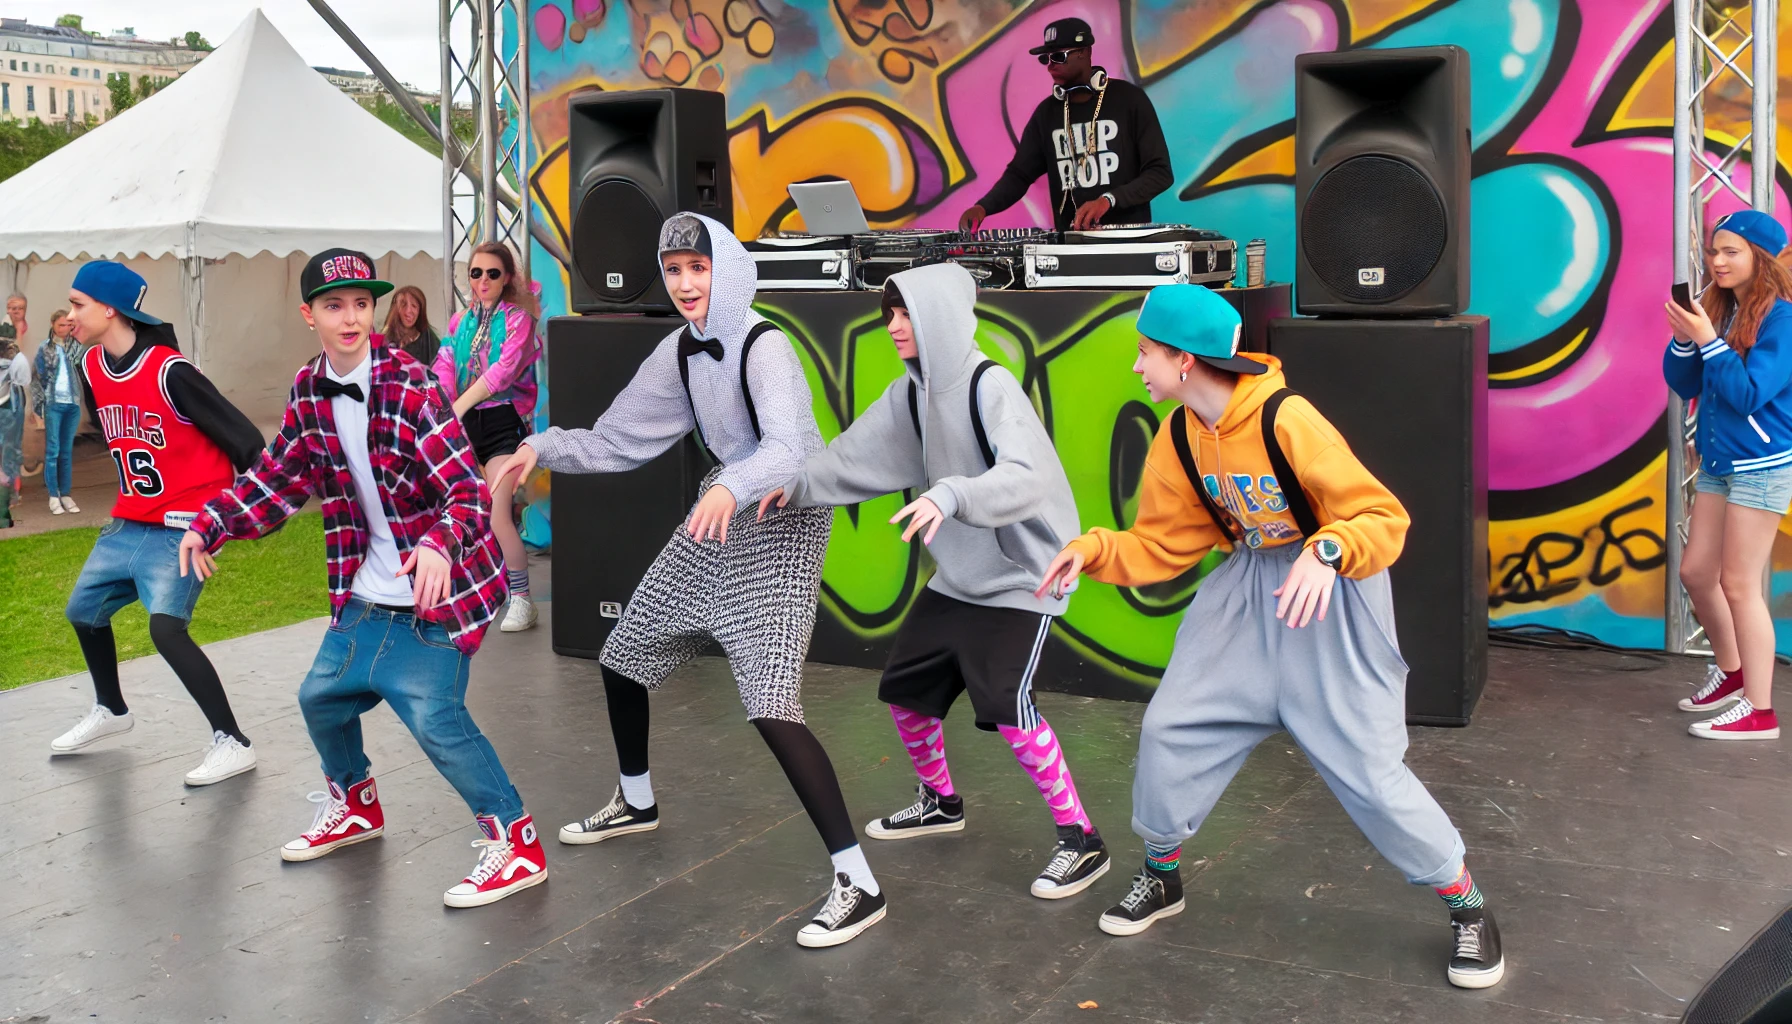 A comical scene of teens dressed in fashionable hip hop attire dancing the Louisiana Jig to hip hop music at an outdoor festival. The dancers are wearing trendy streetwear, including baggy pants, hoodies, and sneakers, and they are striking exaggerated poses. The background shows a DJ with turntables and large speakers, with bright, graffiti-style decorations and a humorous, playful atmosphere.